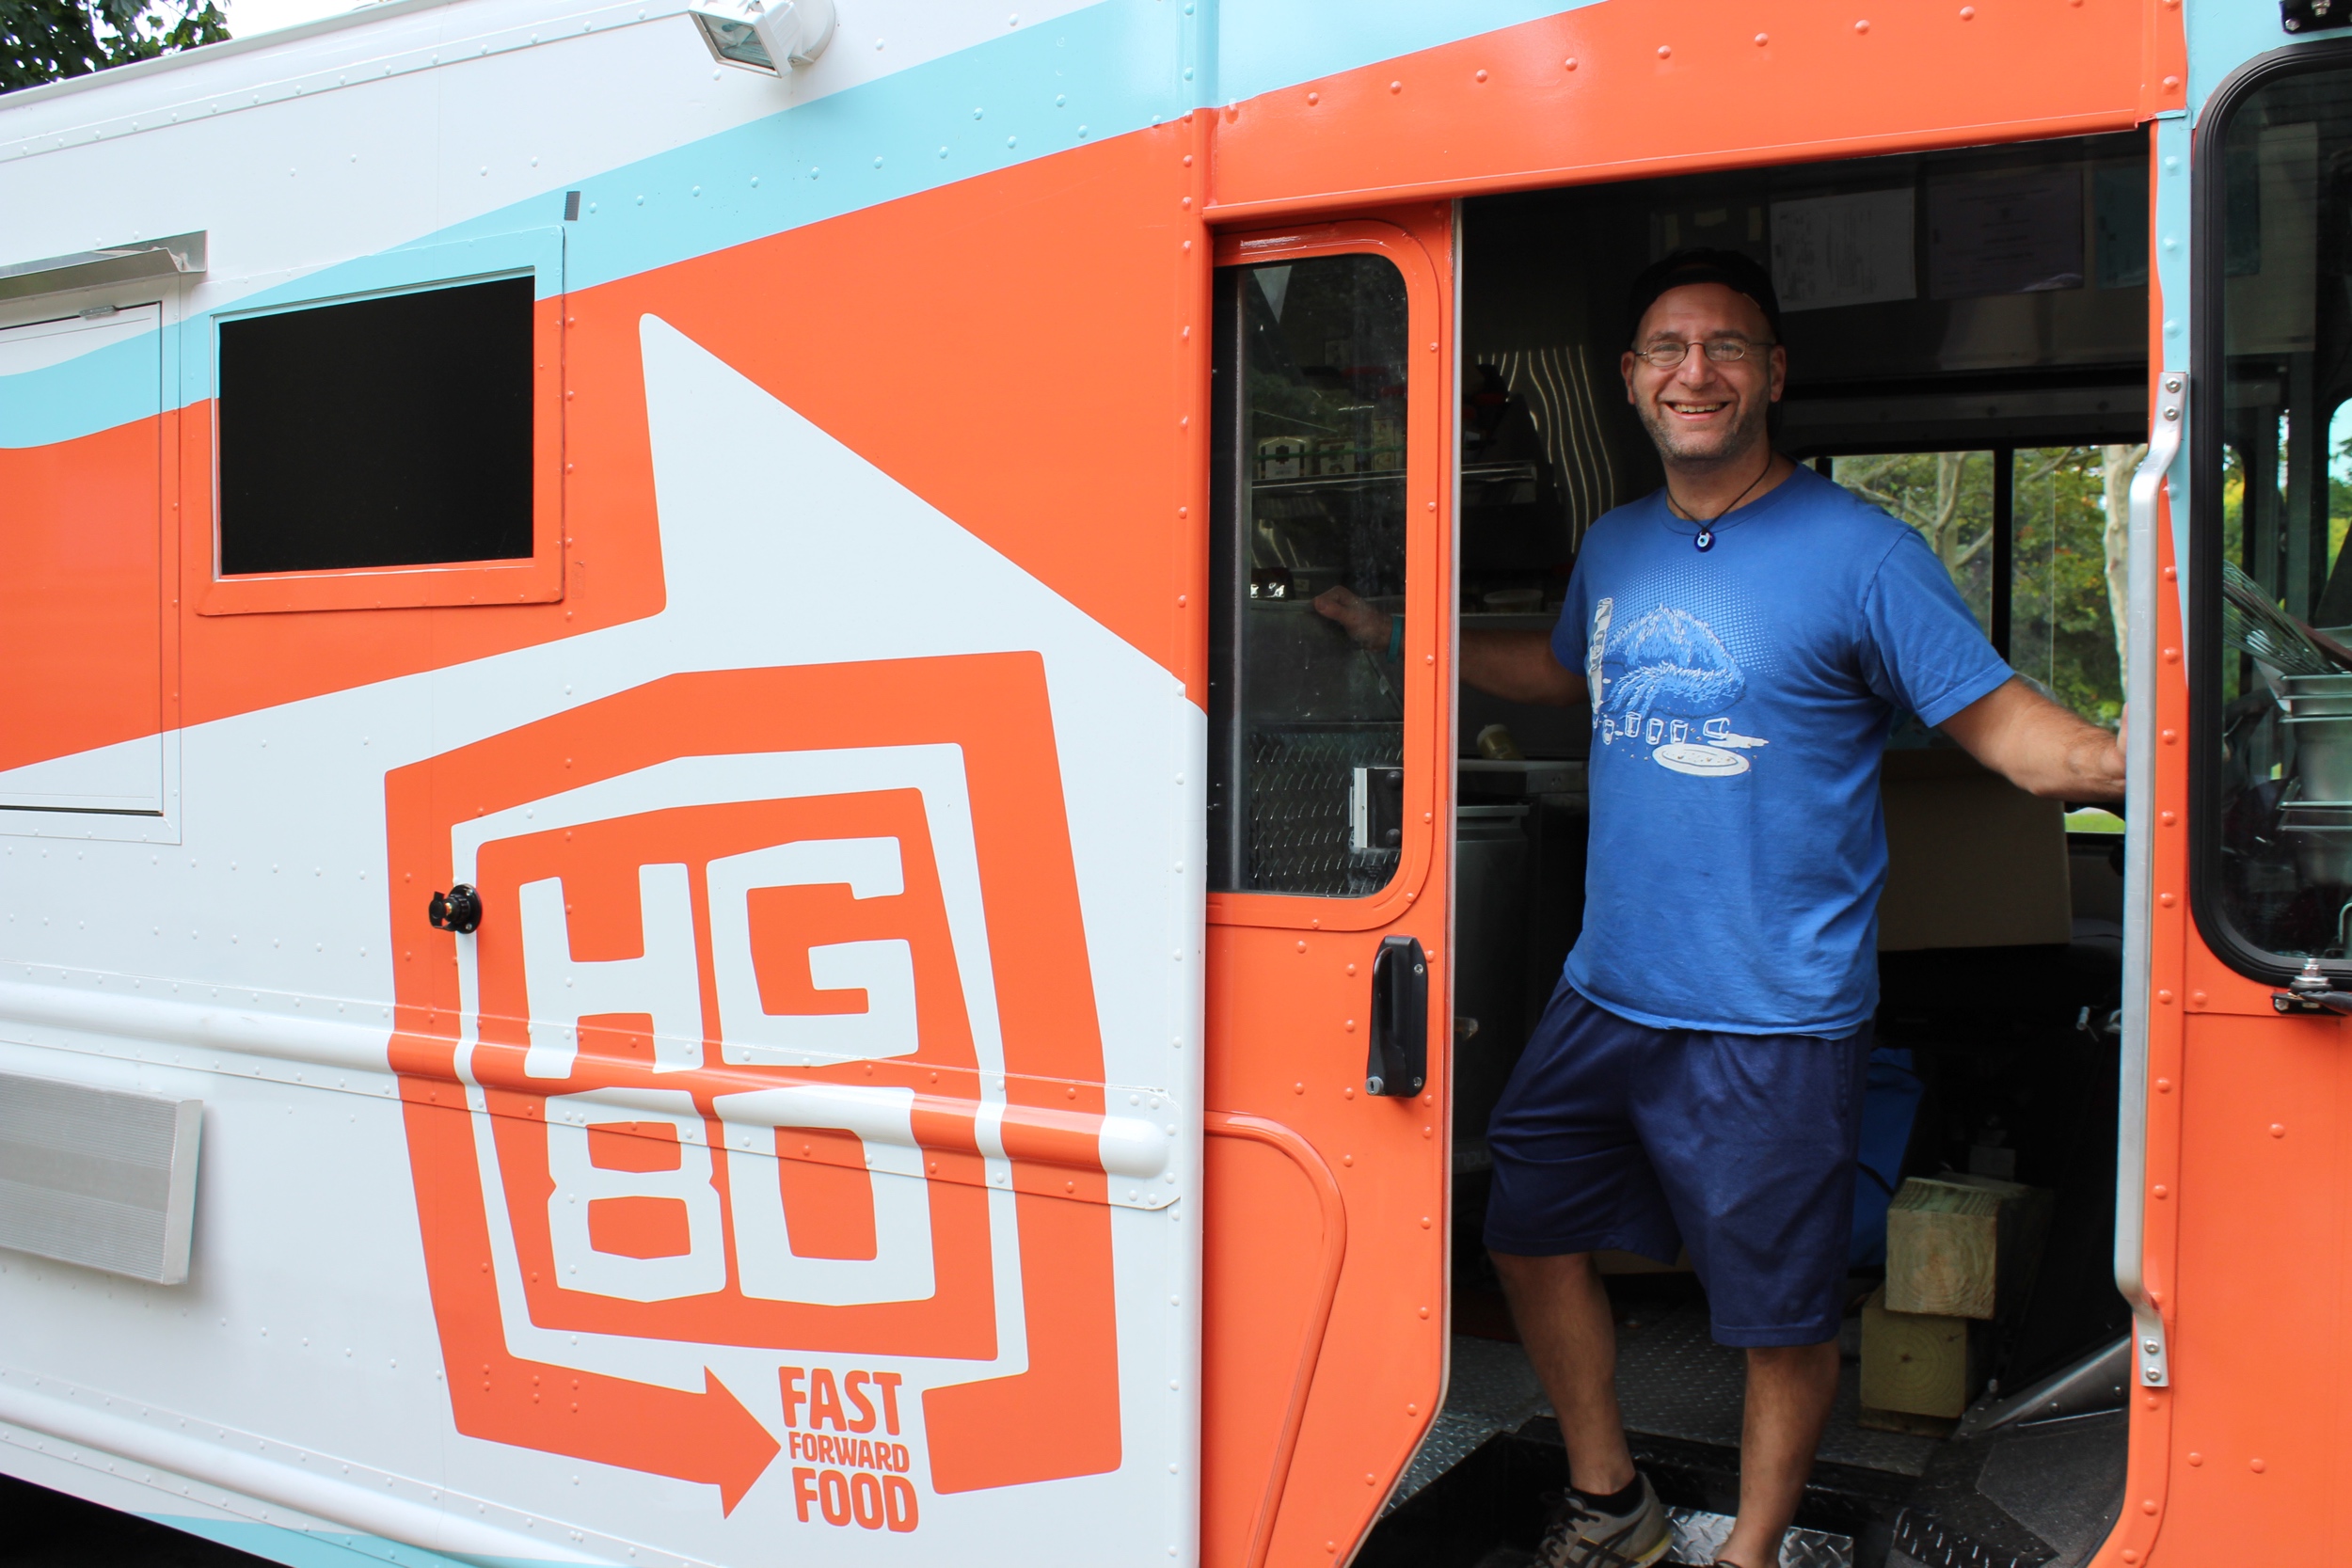  Providence’s newest food truck, HG80, debuted at the House Tour Photo by Jessica Jennings 